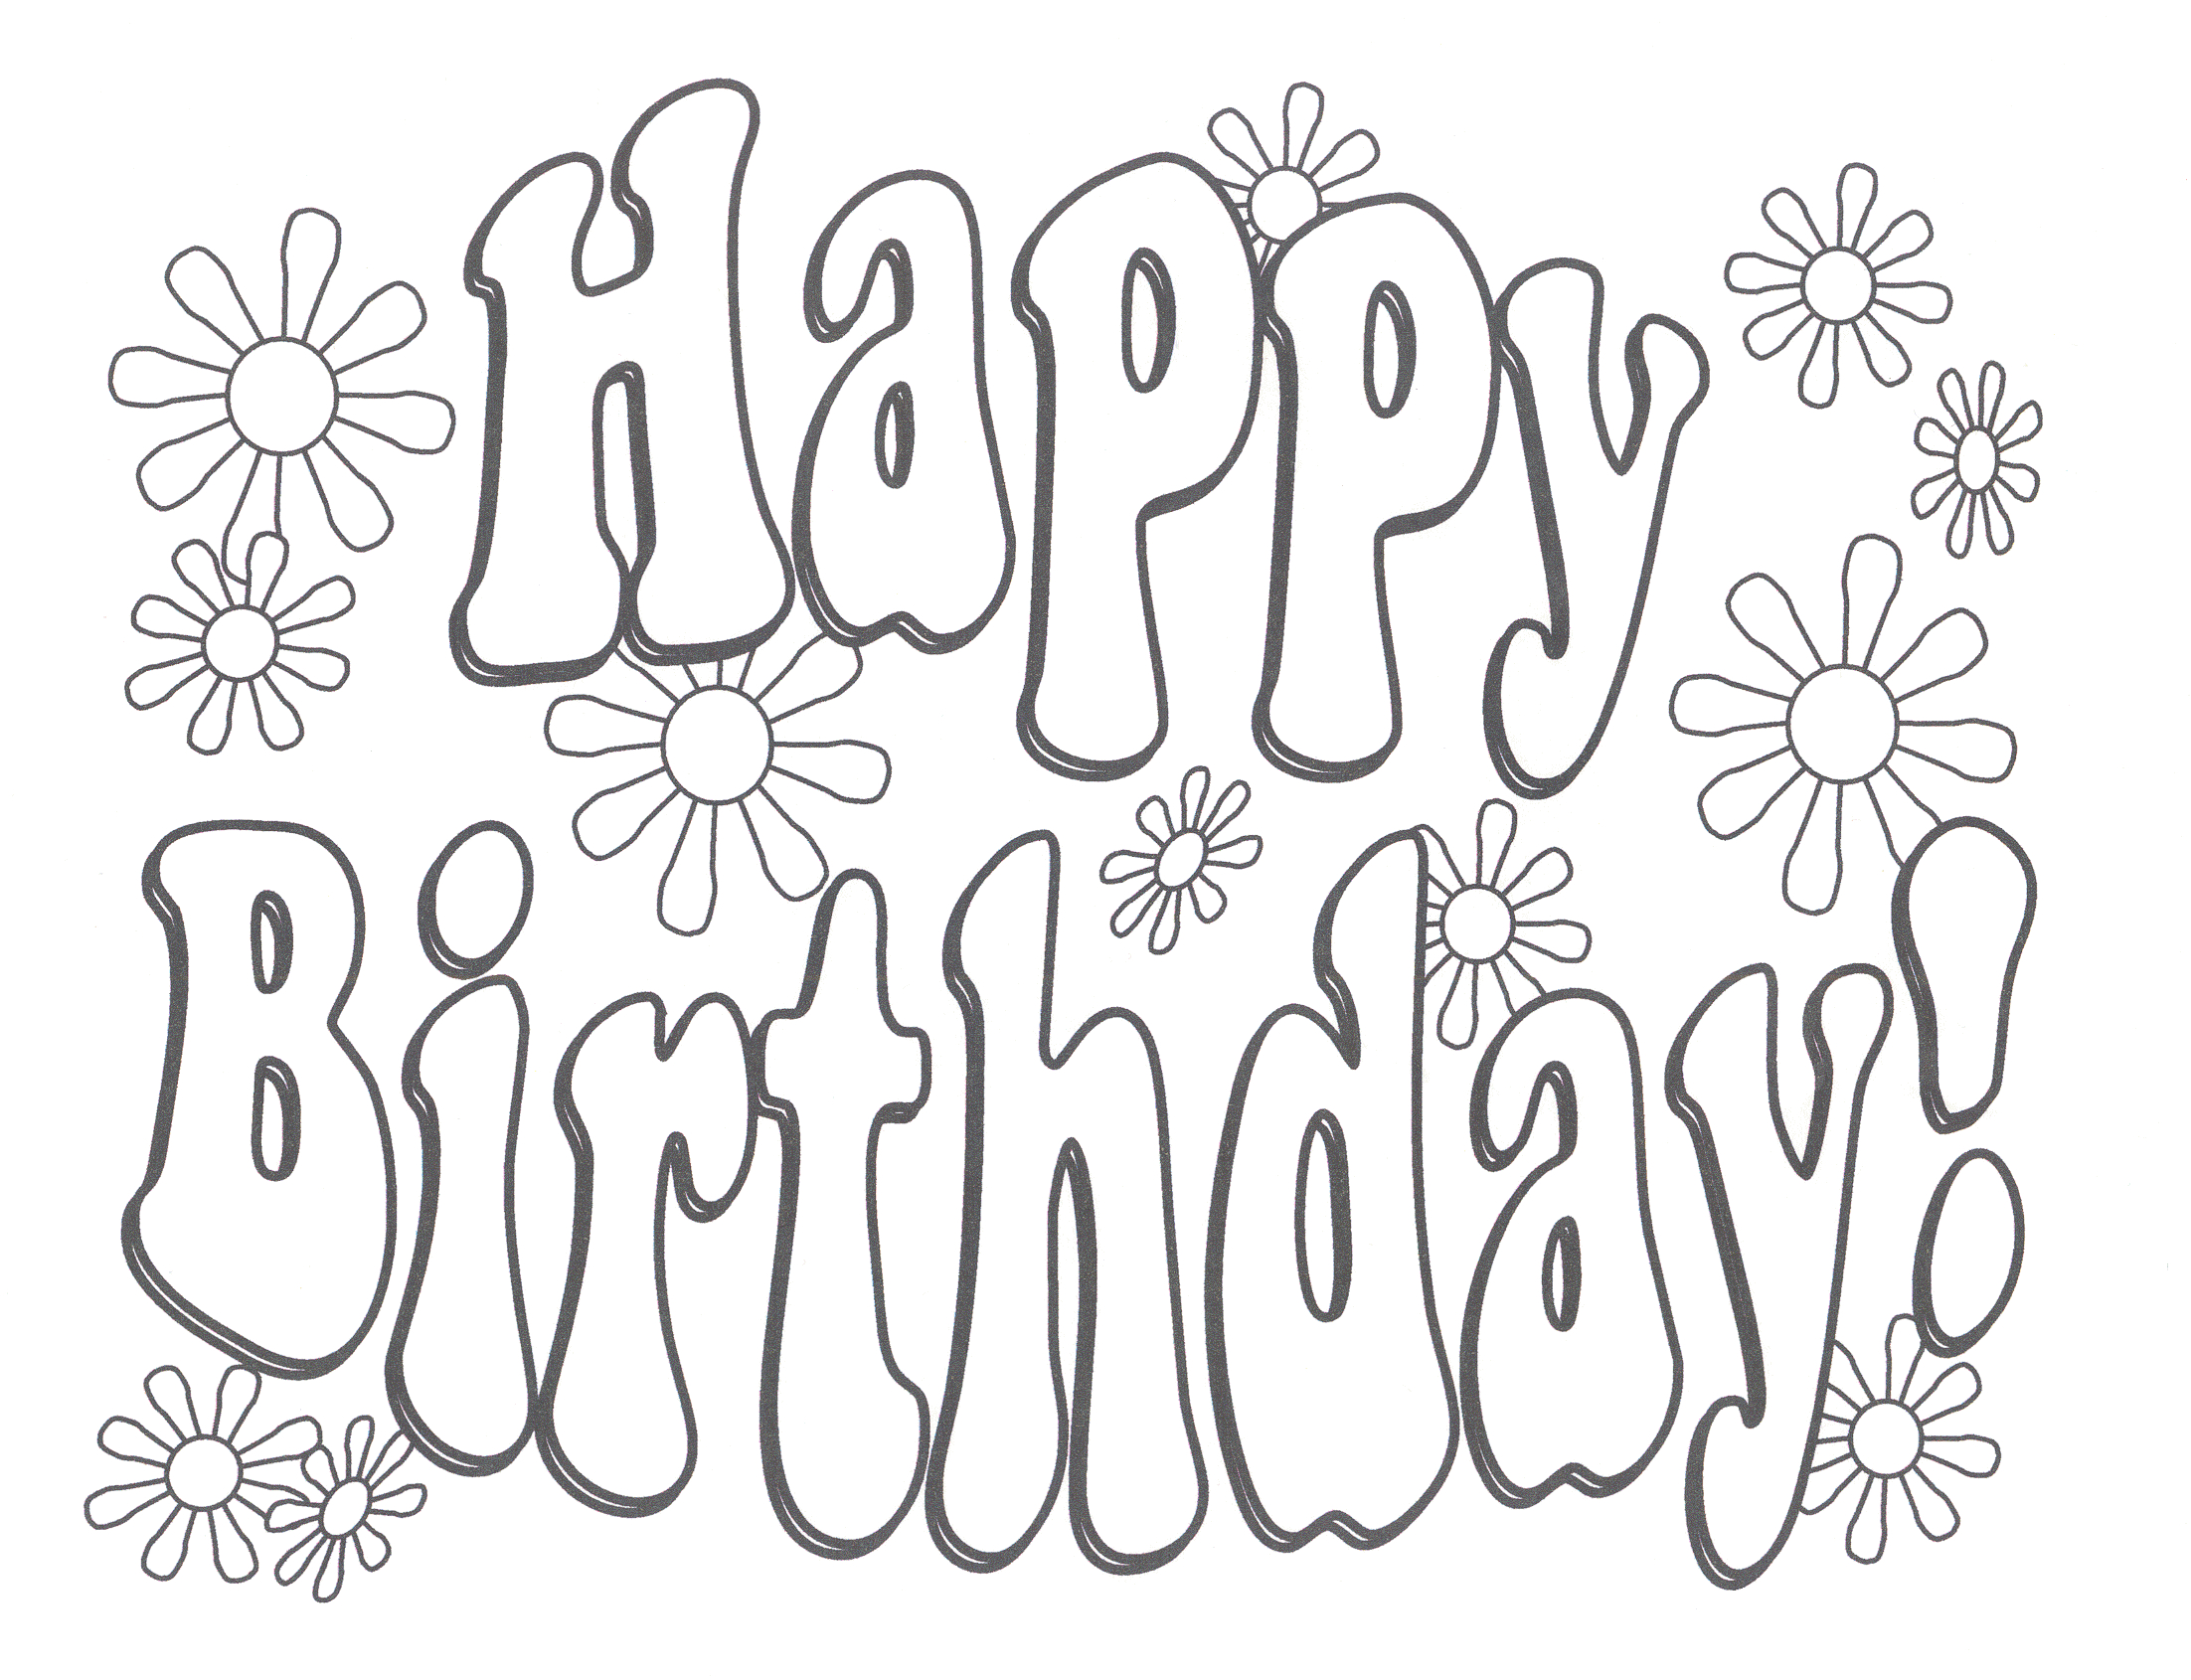 Happy Birthday Coloring Pages To Print Coloring Pages Stunningy Birthday Coloring Card Pages Free